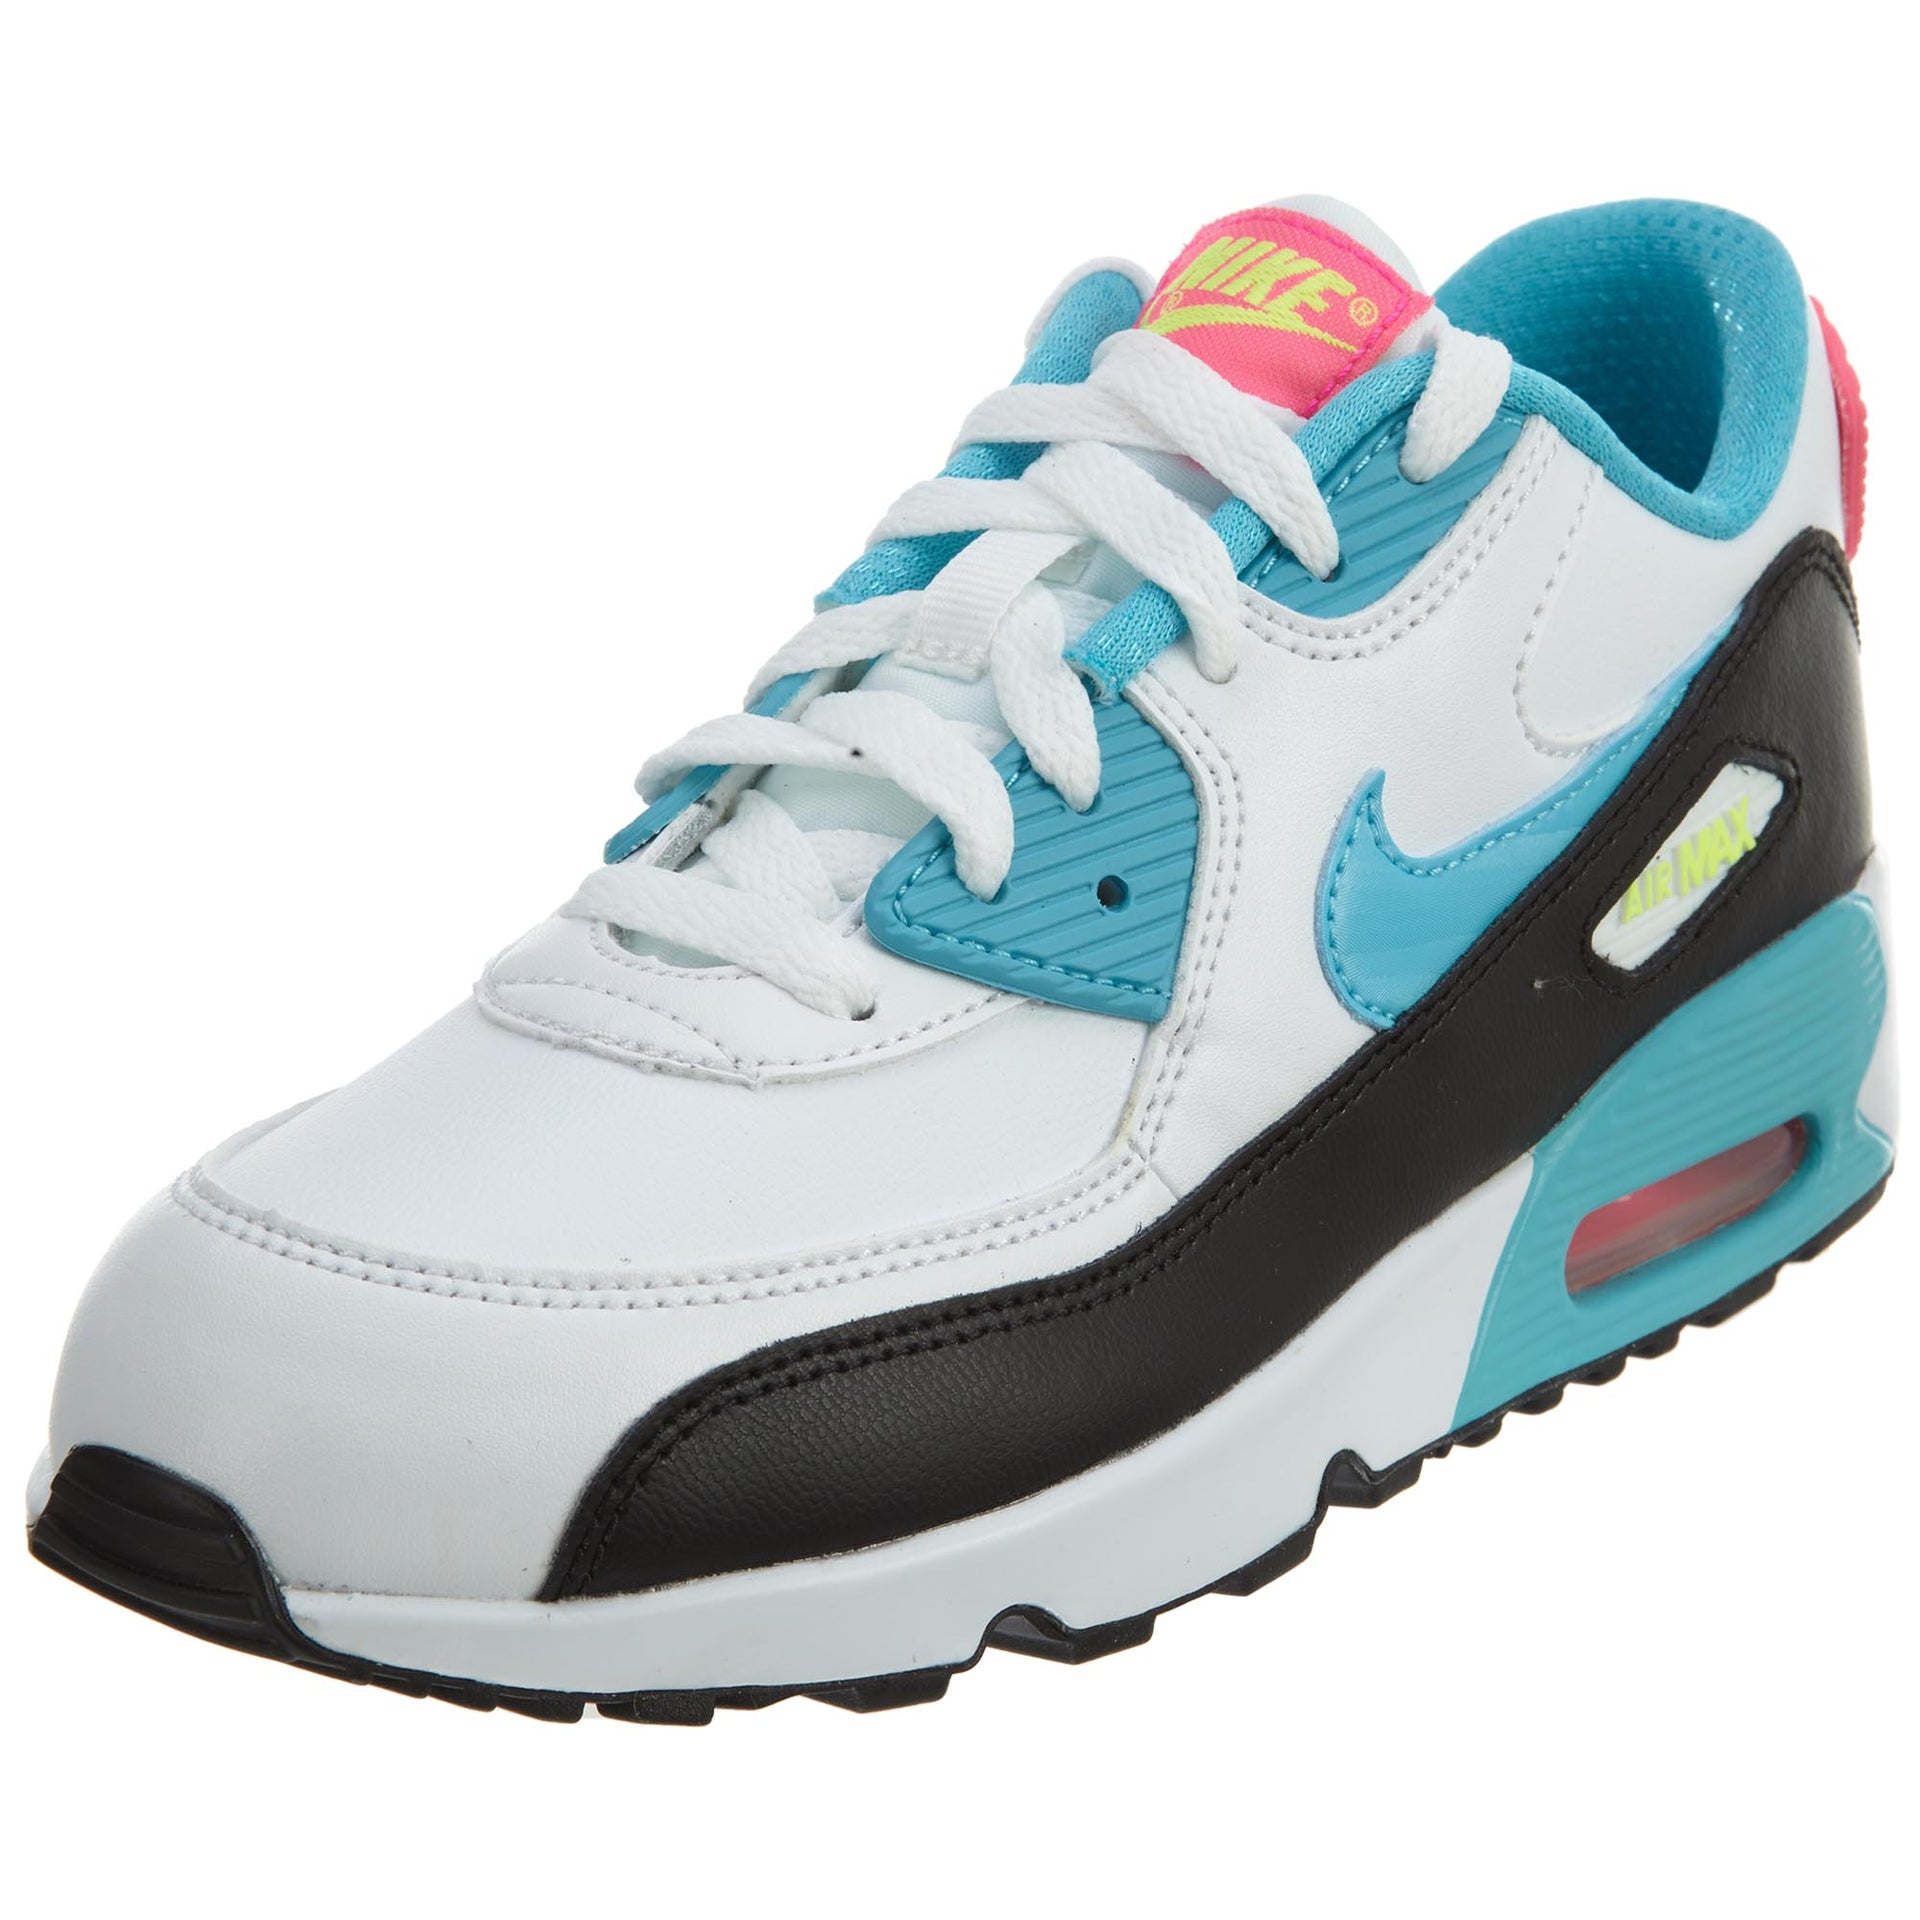 Nike Air Max 90 Ltr (Ps) Little Kids Style : 833377